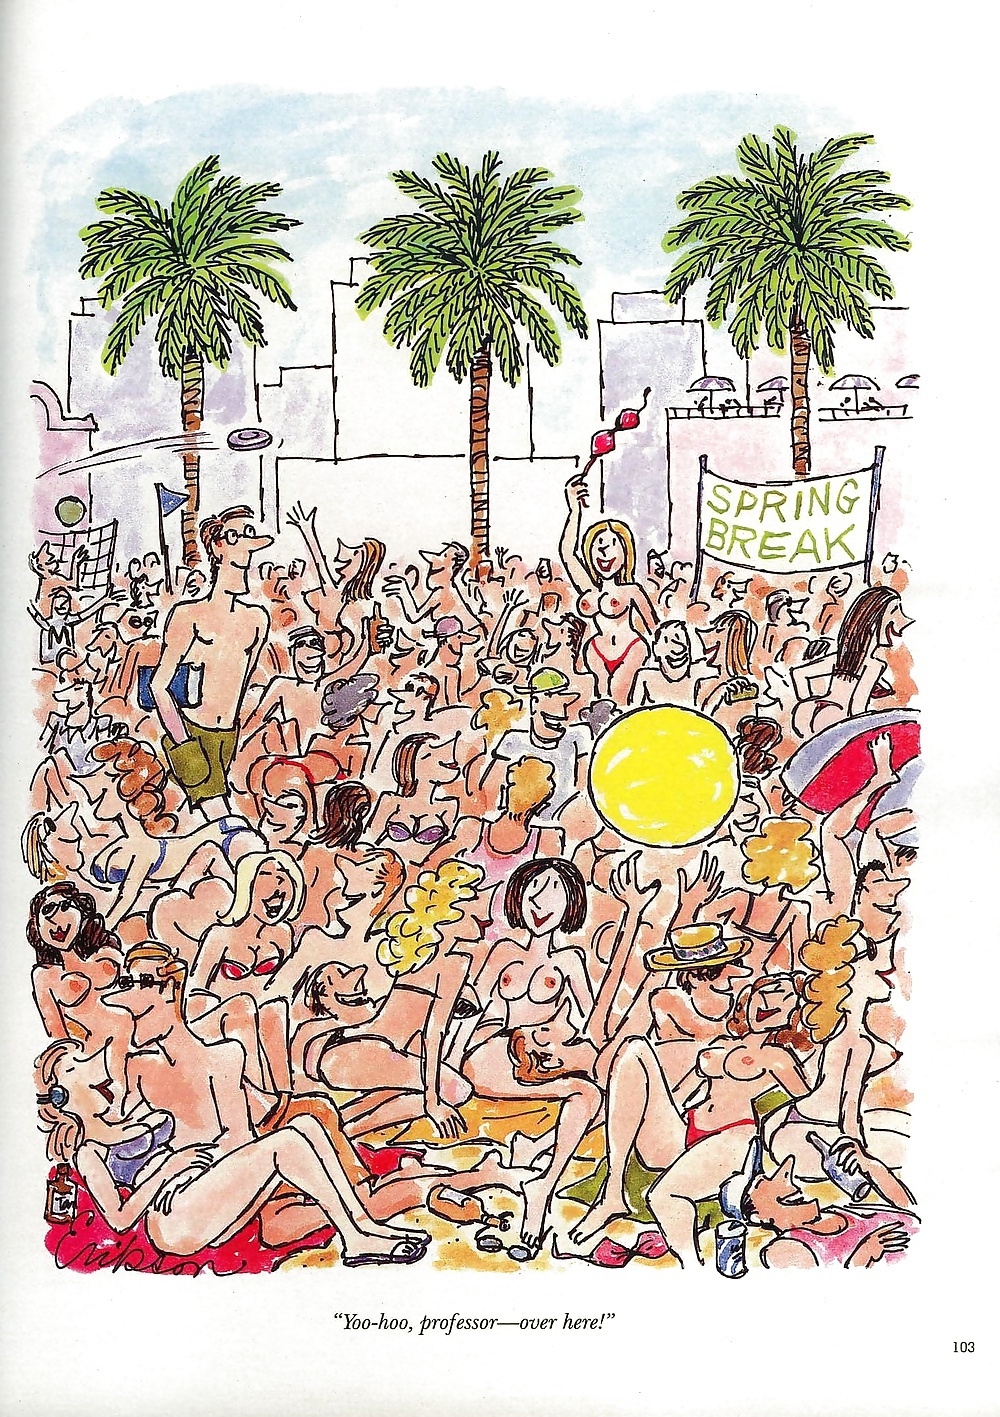 The best Playboy's cartoons from 2004